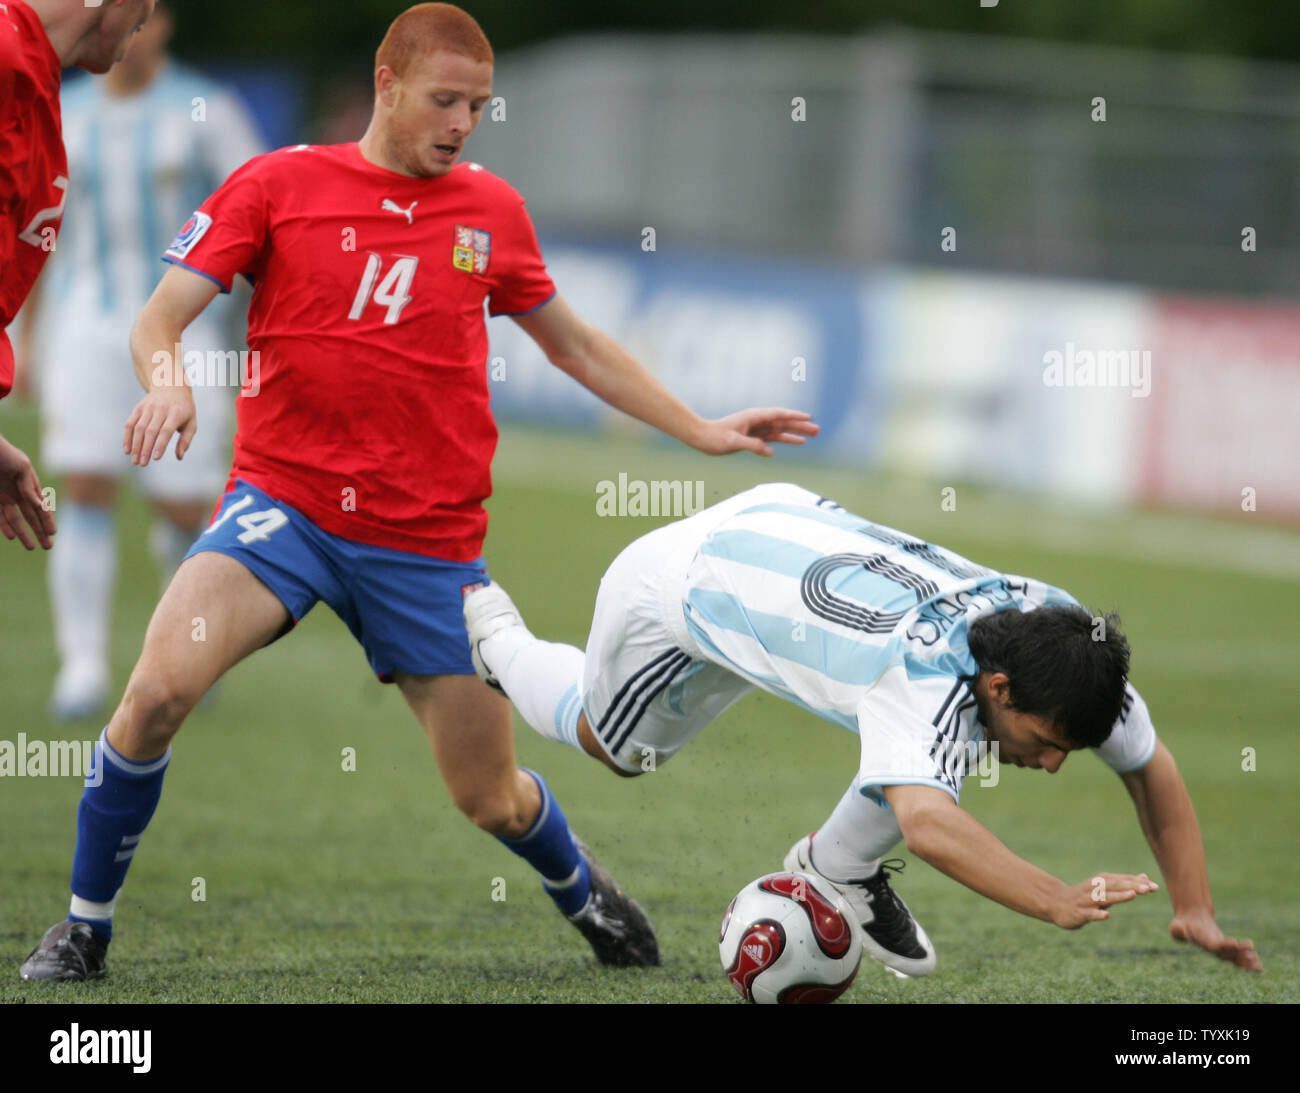 Czech Republic's midfielder Marcel Gecov (L) trips Argentina's forward Sergio Aguero during the first half of the FIFA Under-20 World Cup match at Frank Clair Stadium in Ottawa, Canada on June 30, 2007. The match ended in a scoreless tie. (UPI Photo/Grace Chiu). Stock Photo